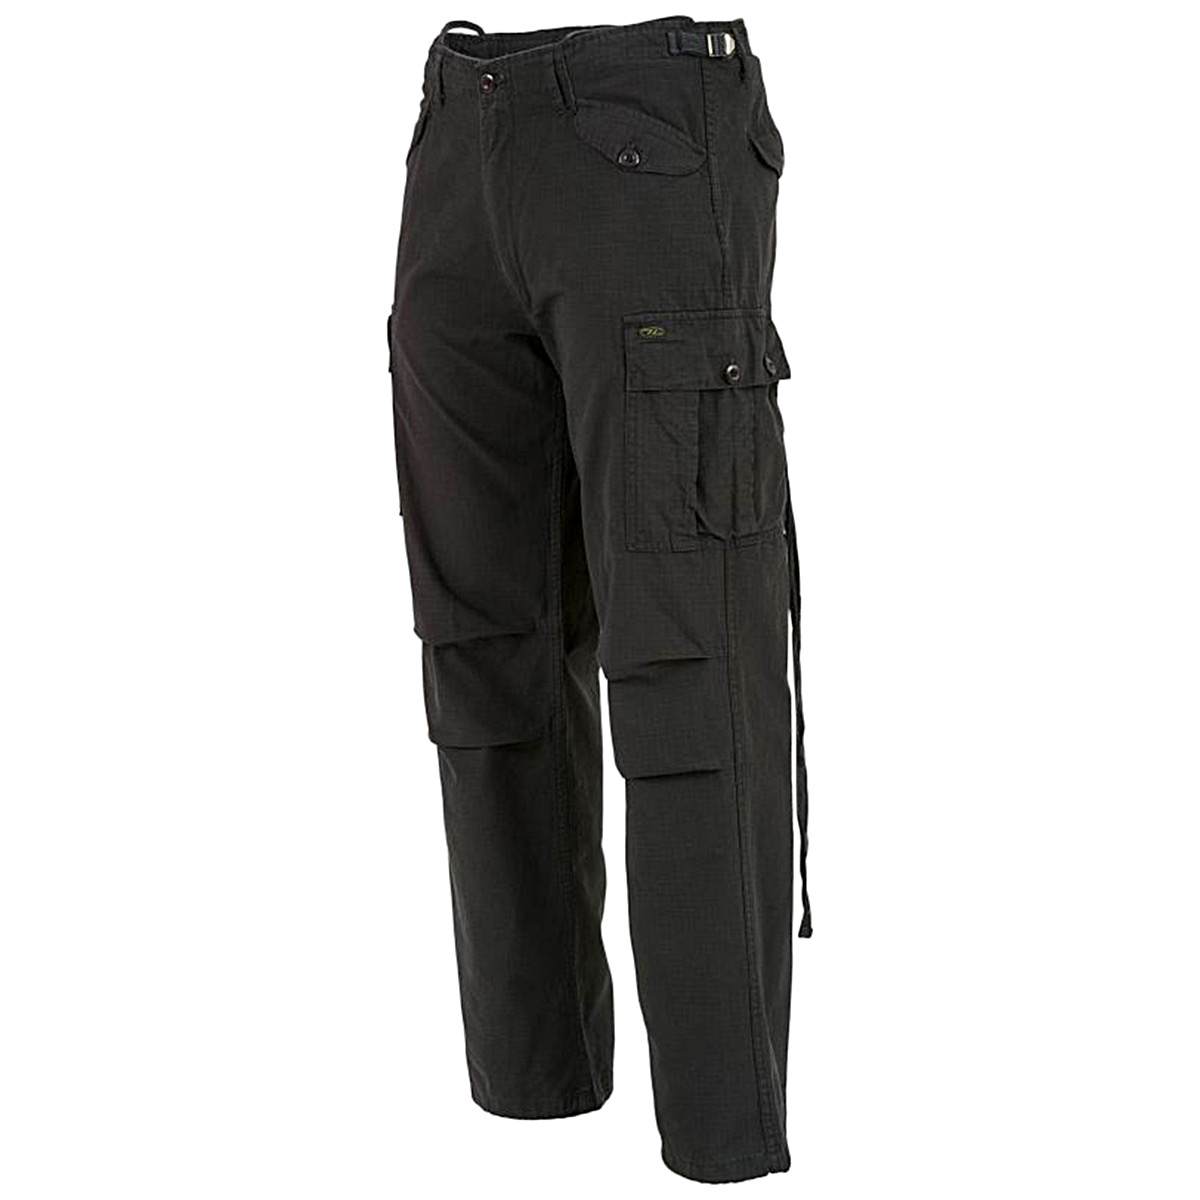 Highlander M65 Ripstop Combat Trousers Lightweight Cotton Military Army ...